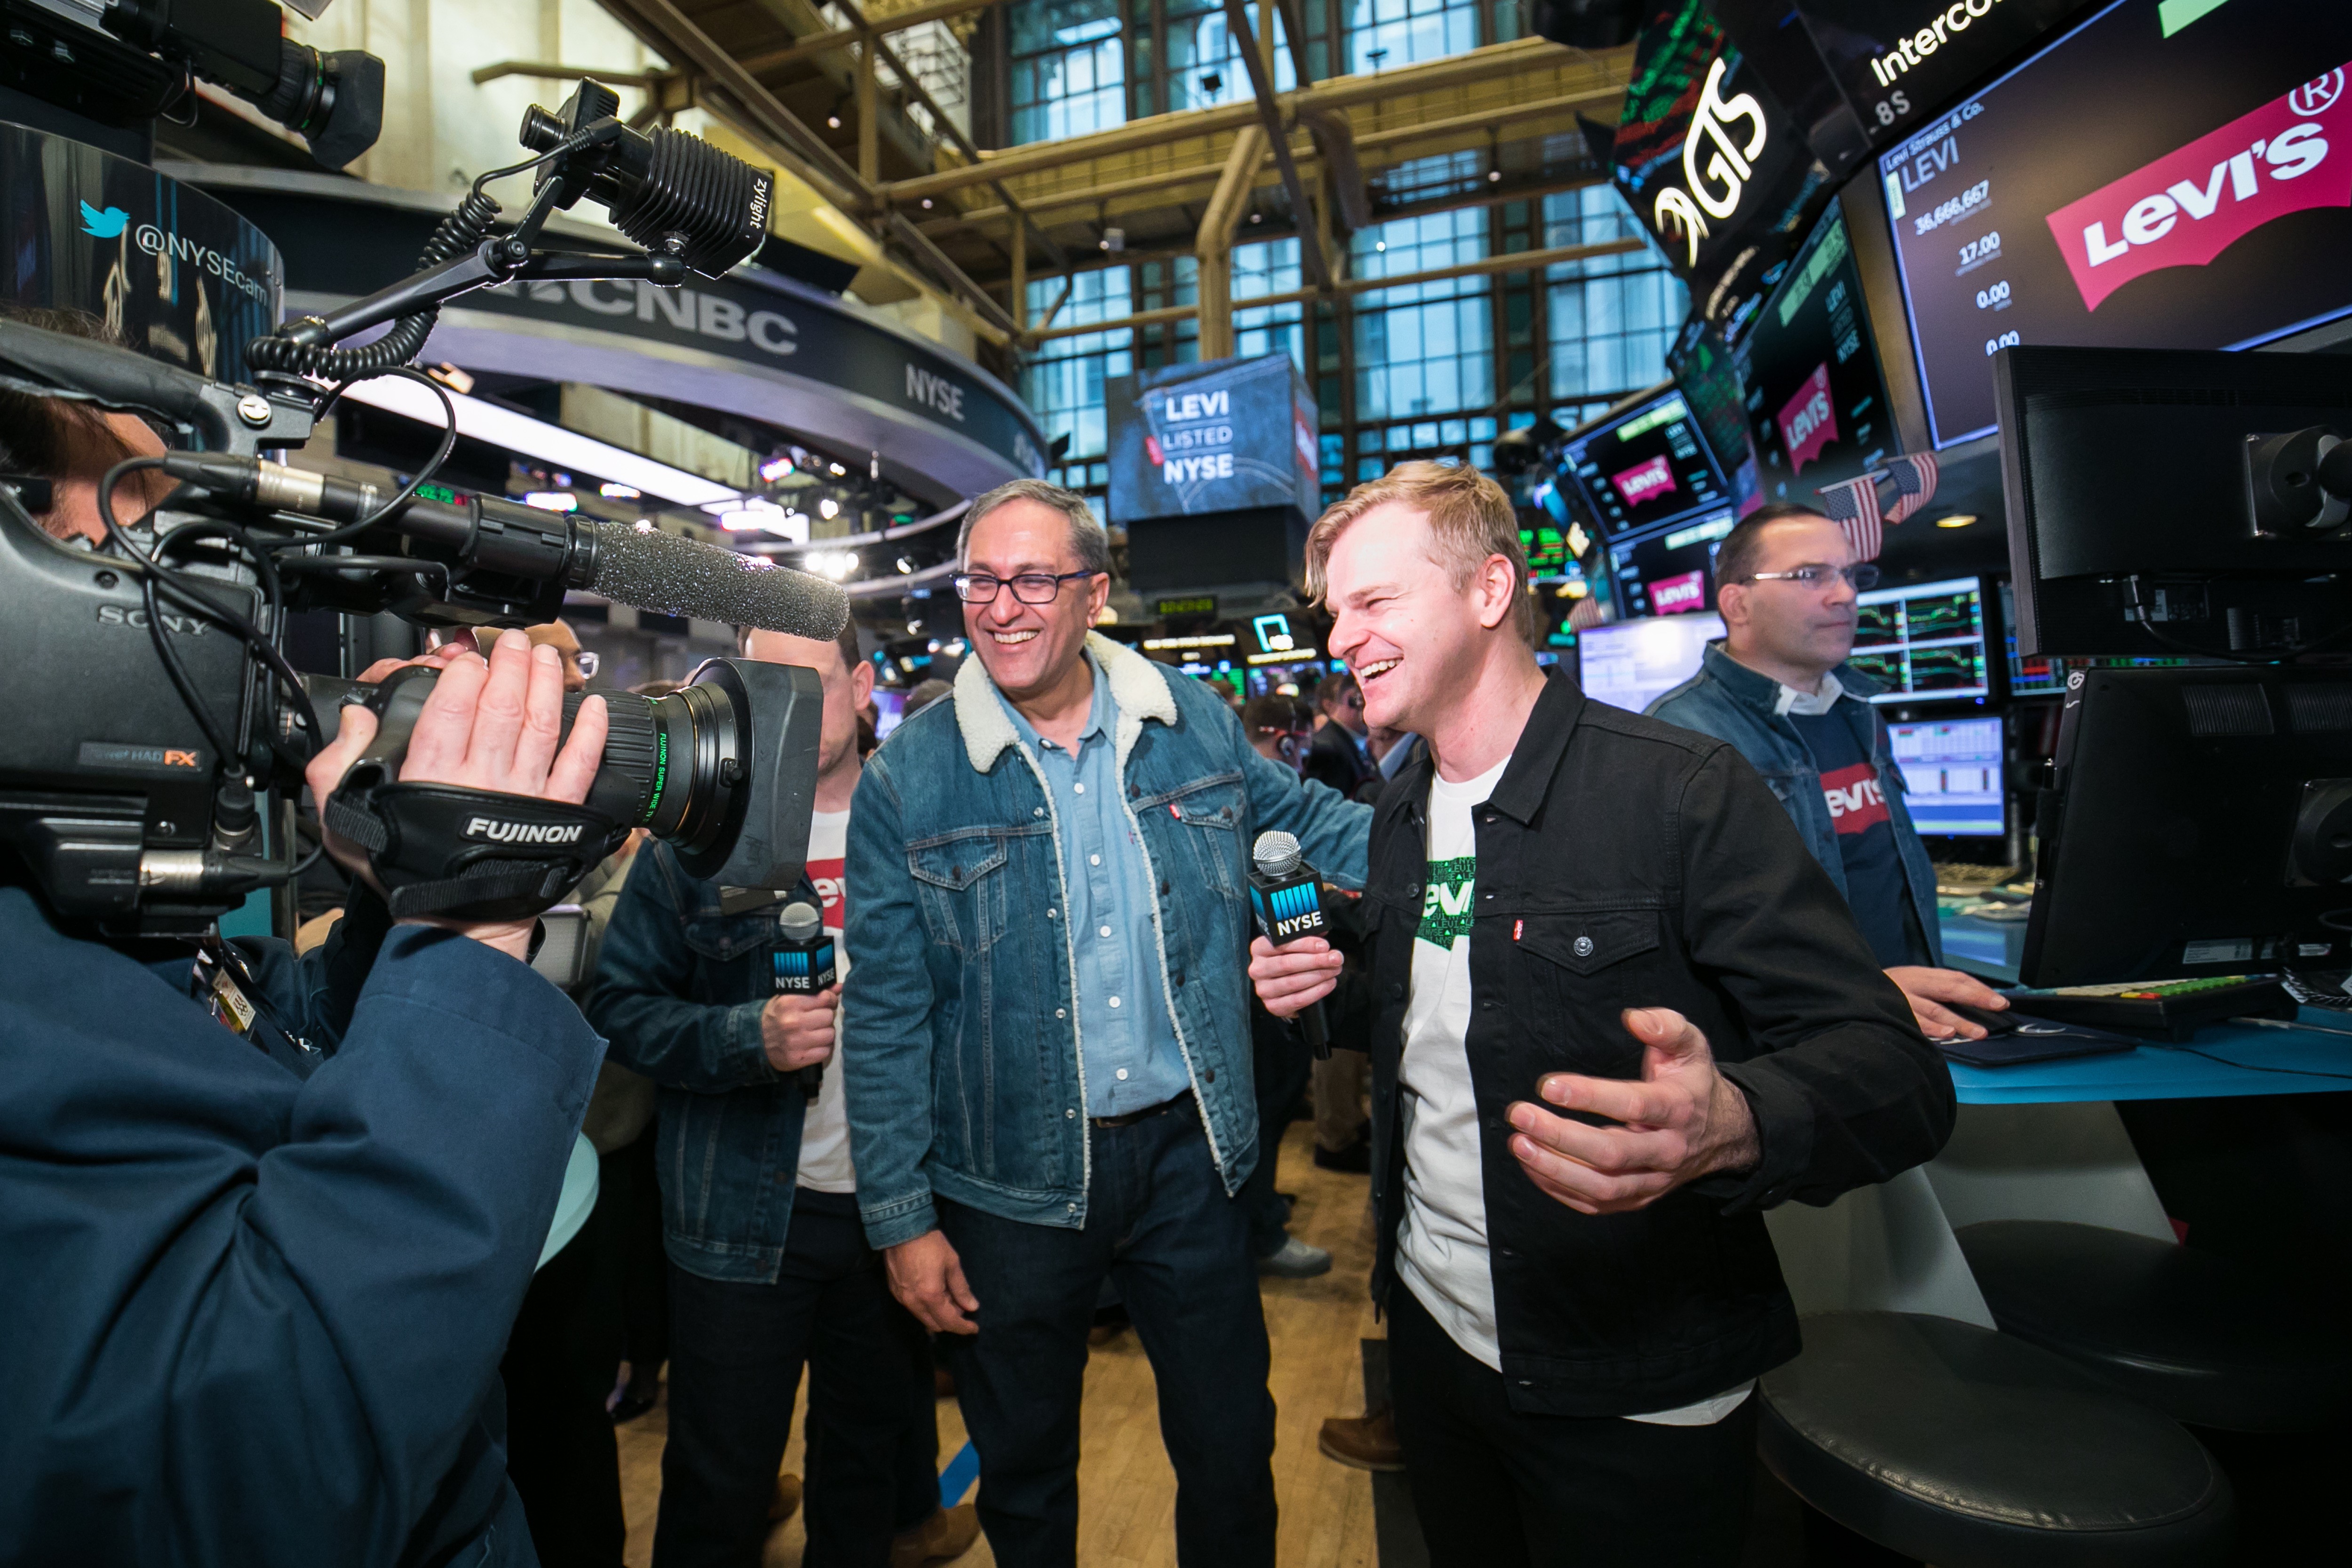 Ryan Green interviews Levi’s executives after the opening bell.